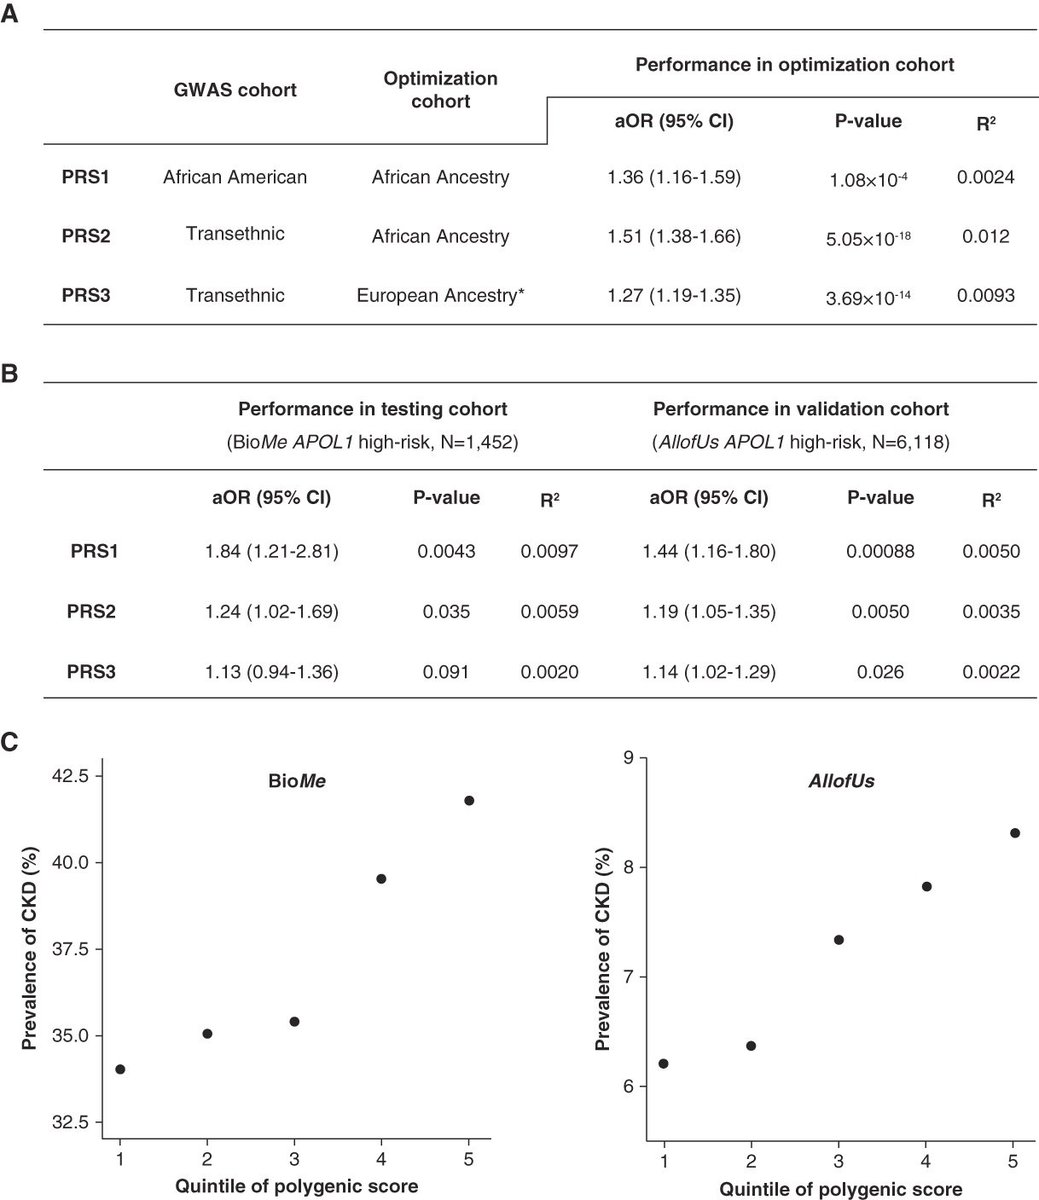 APOL1 high-risk (APOL1 HR) genotypes are increasingly being tested in clinical practice and as novel targets. This study evaluated the performance of a PRS for CKD stage 3 or higher in individuals with APOL1 HR bit.ly/CJASN0379 @girish_nadkarni @ogutierrez136